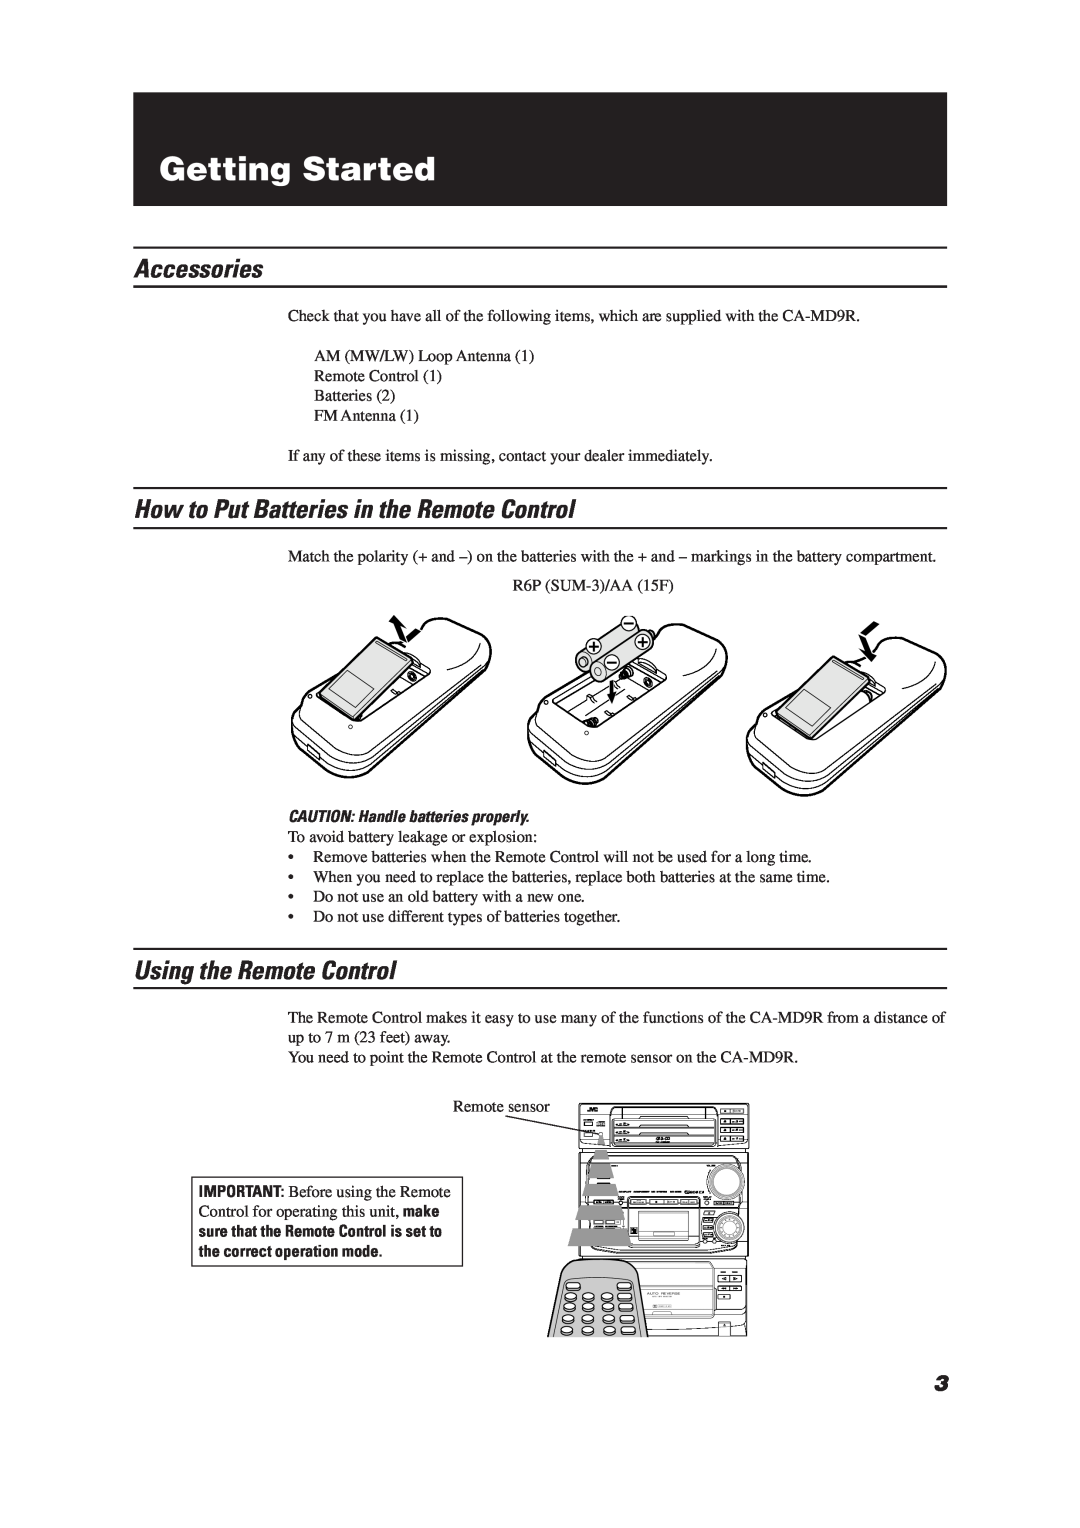 JVC LET0070-002A manual Getting Started, Accessories, How to Put Batteries in the Remote Control, Using the Remote Control 